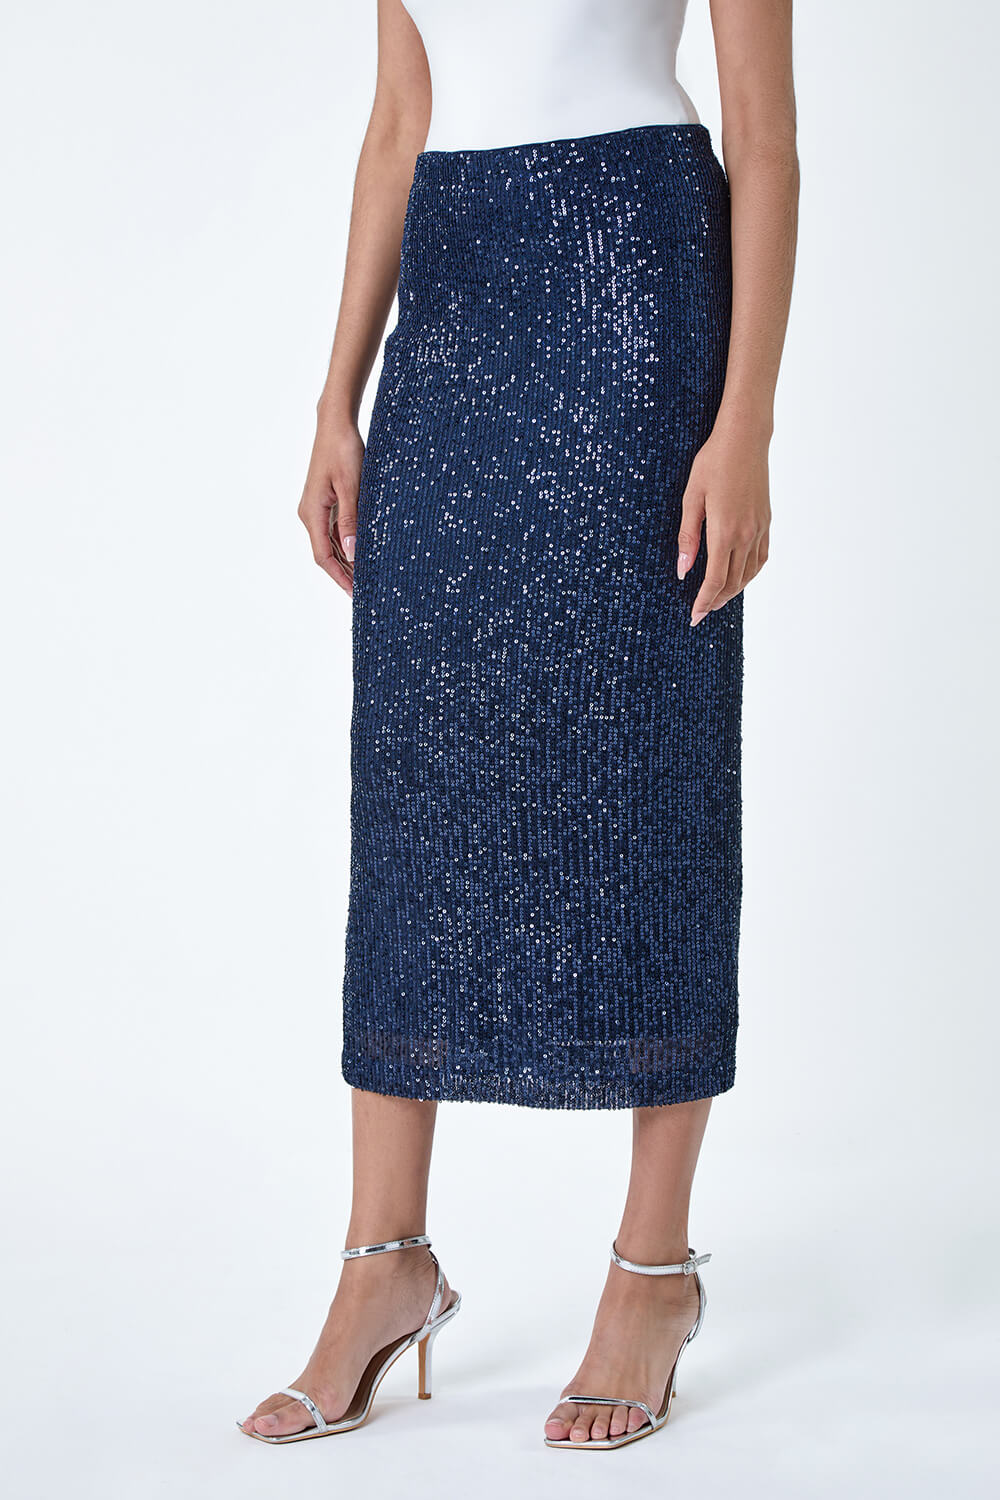 Navy  Sequin Sparkle Stretch Midi Skirt, Image 4 of 5